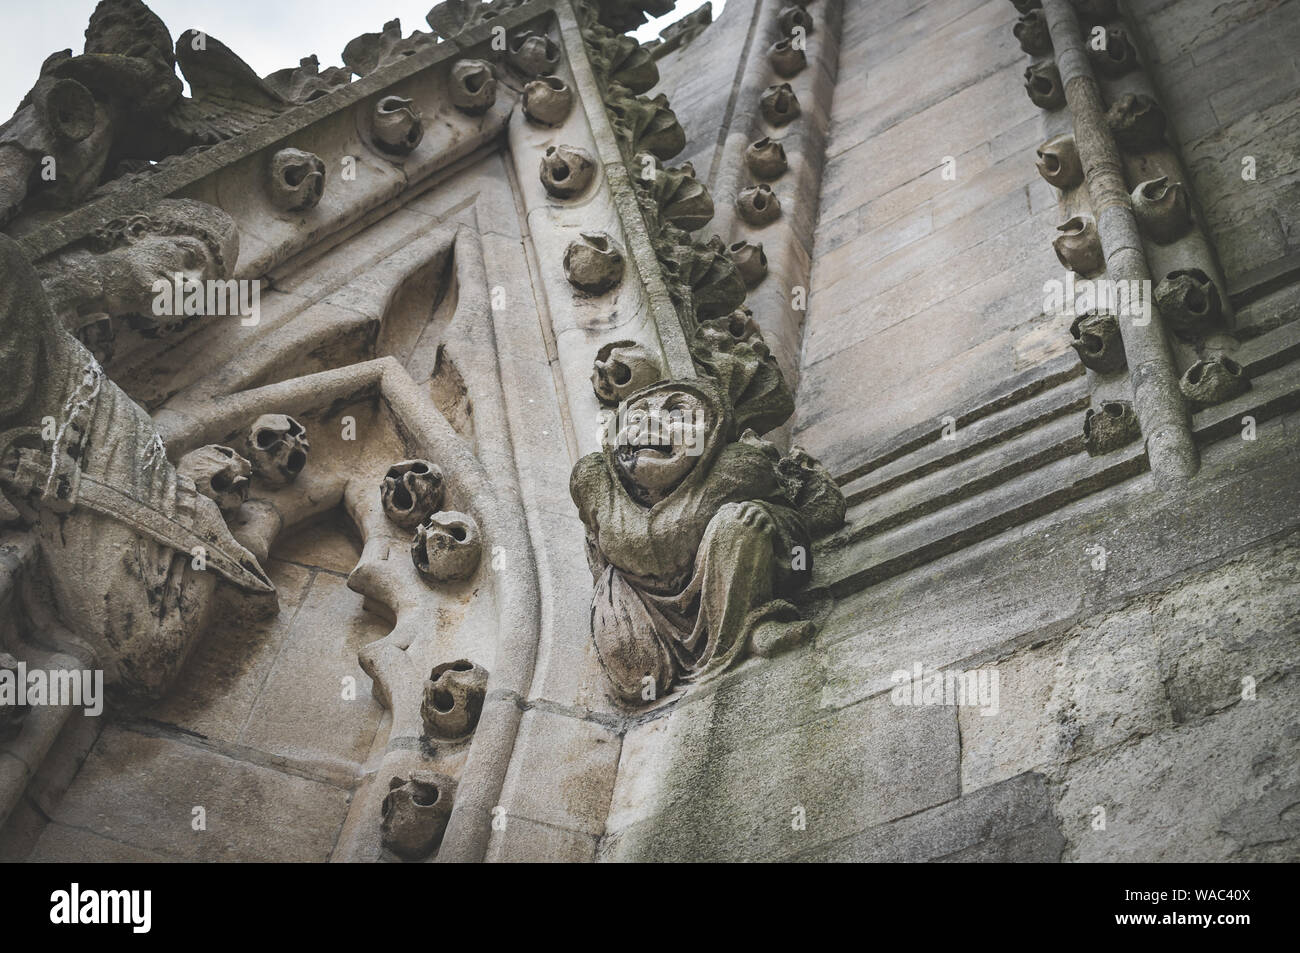 A close up of a carved stone figure and decoration on the tower of the University church of St Mary the Virgin, Oxford, England UK. Stock Photo